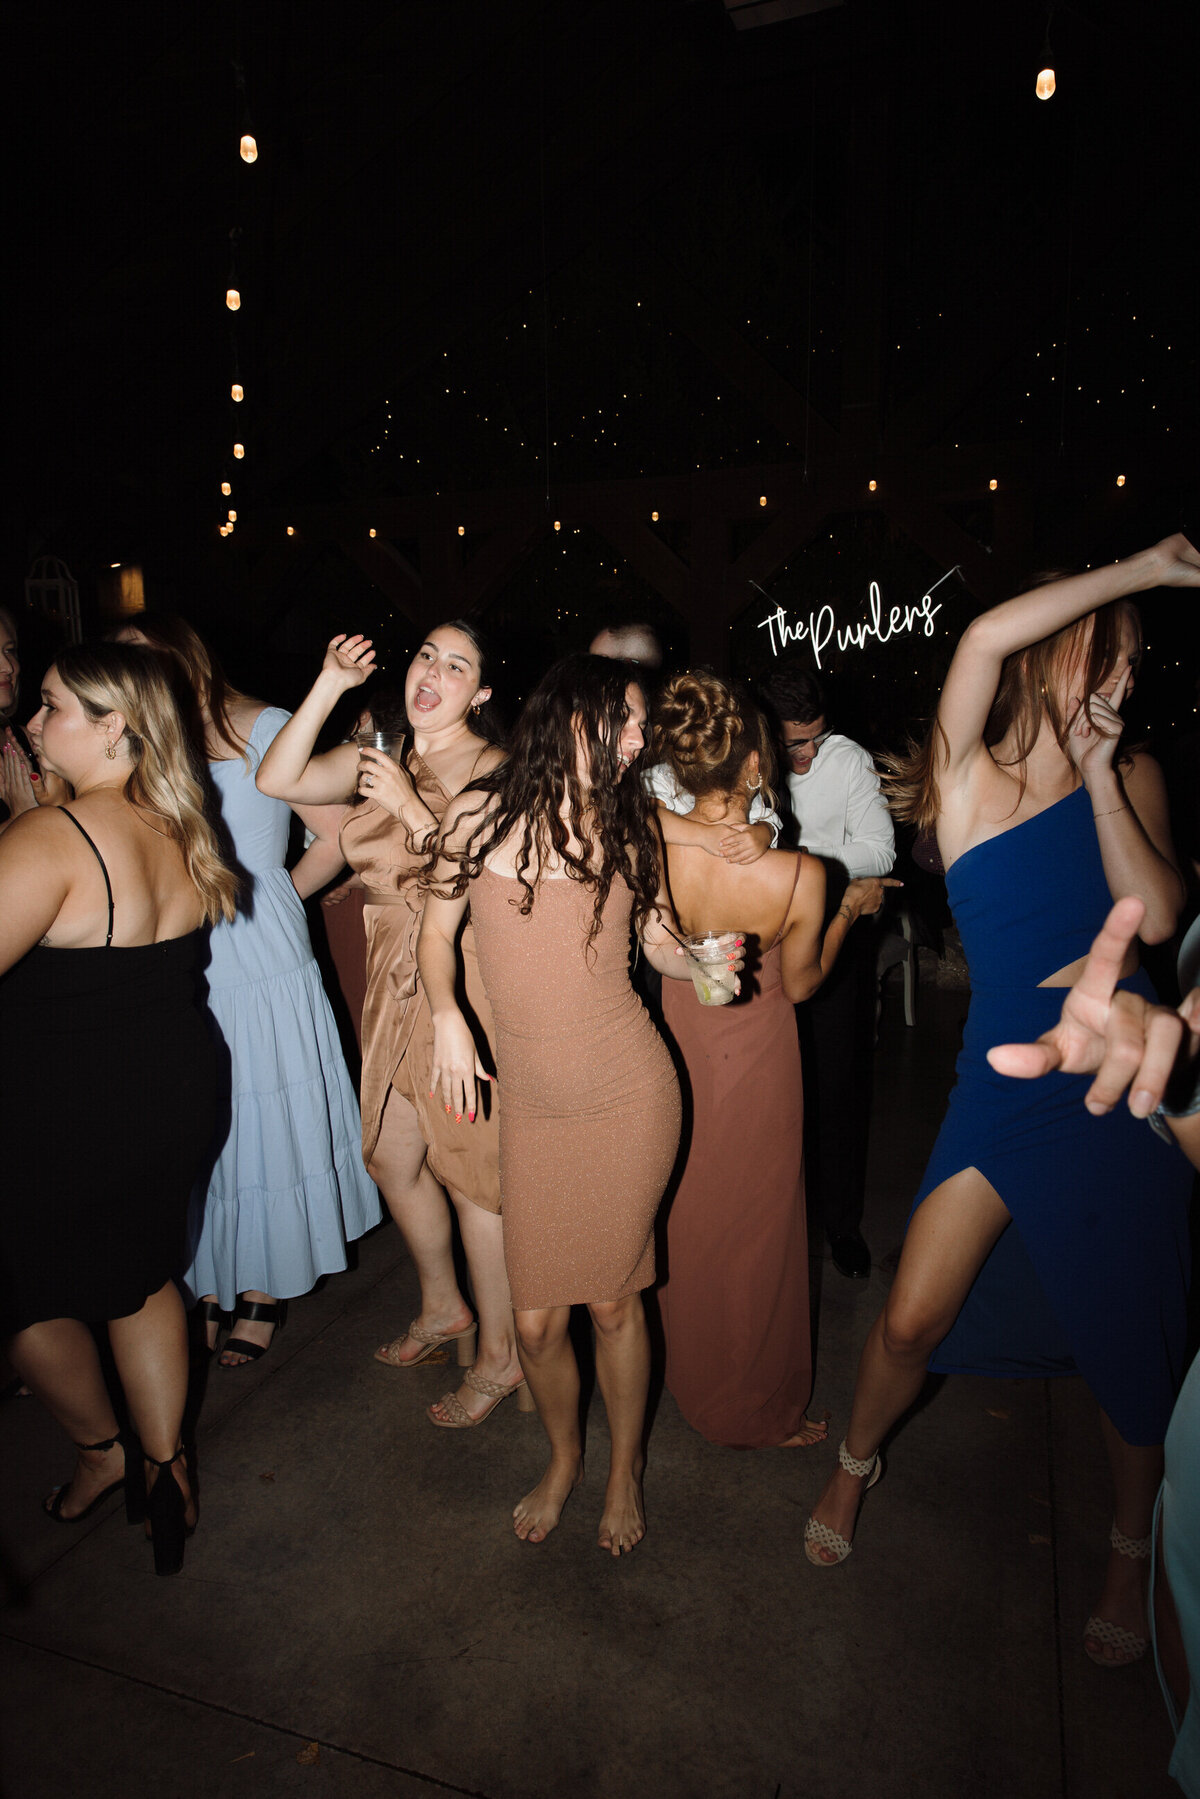 A flash photo of people dancing and having a good time. No faces are shown.